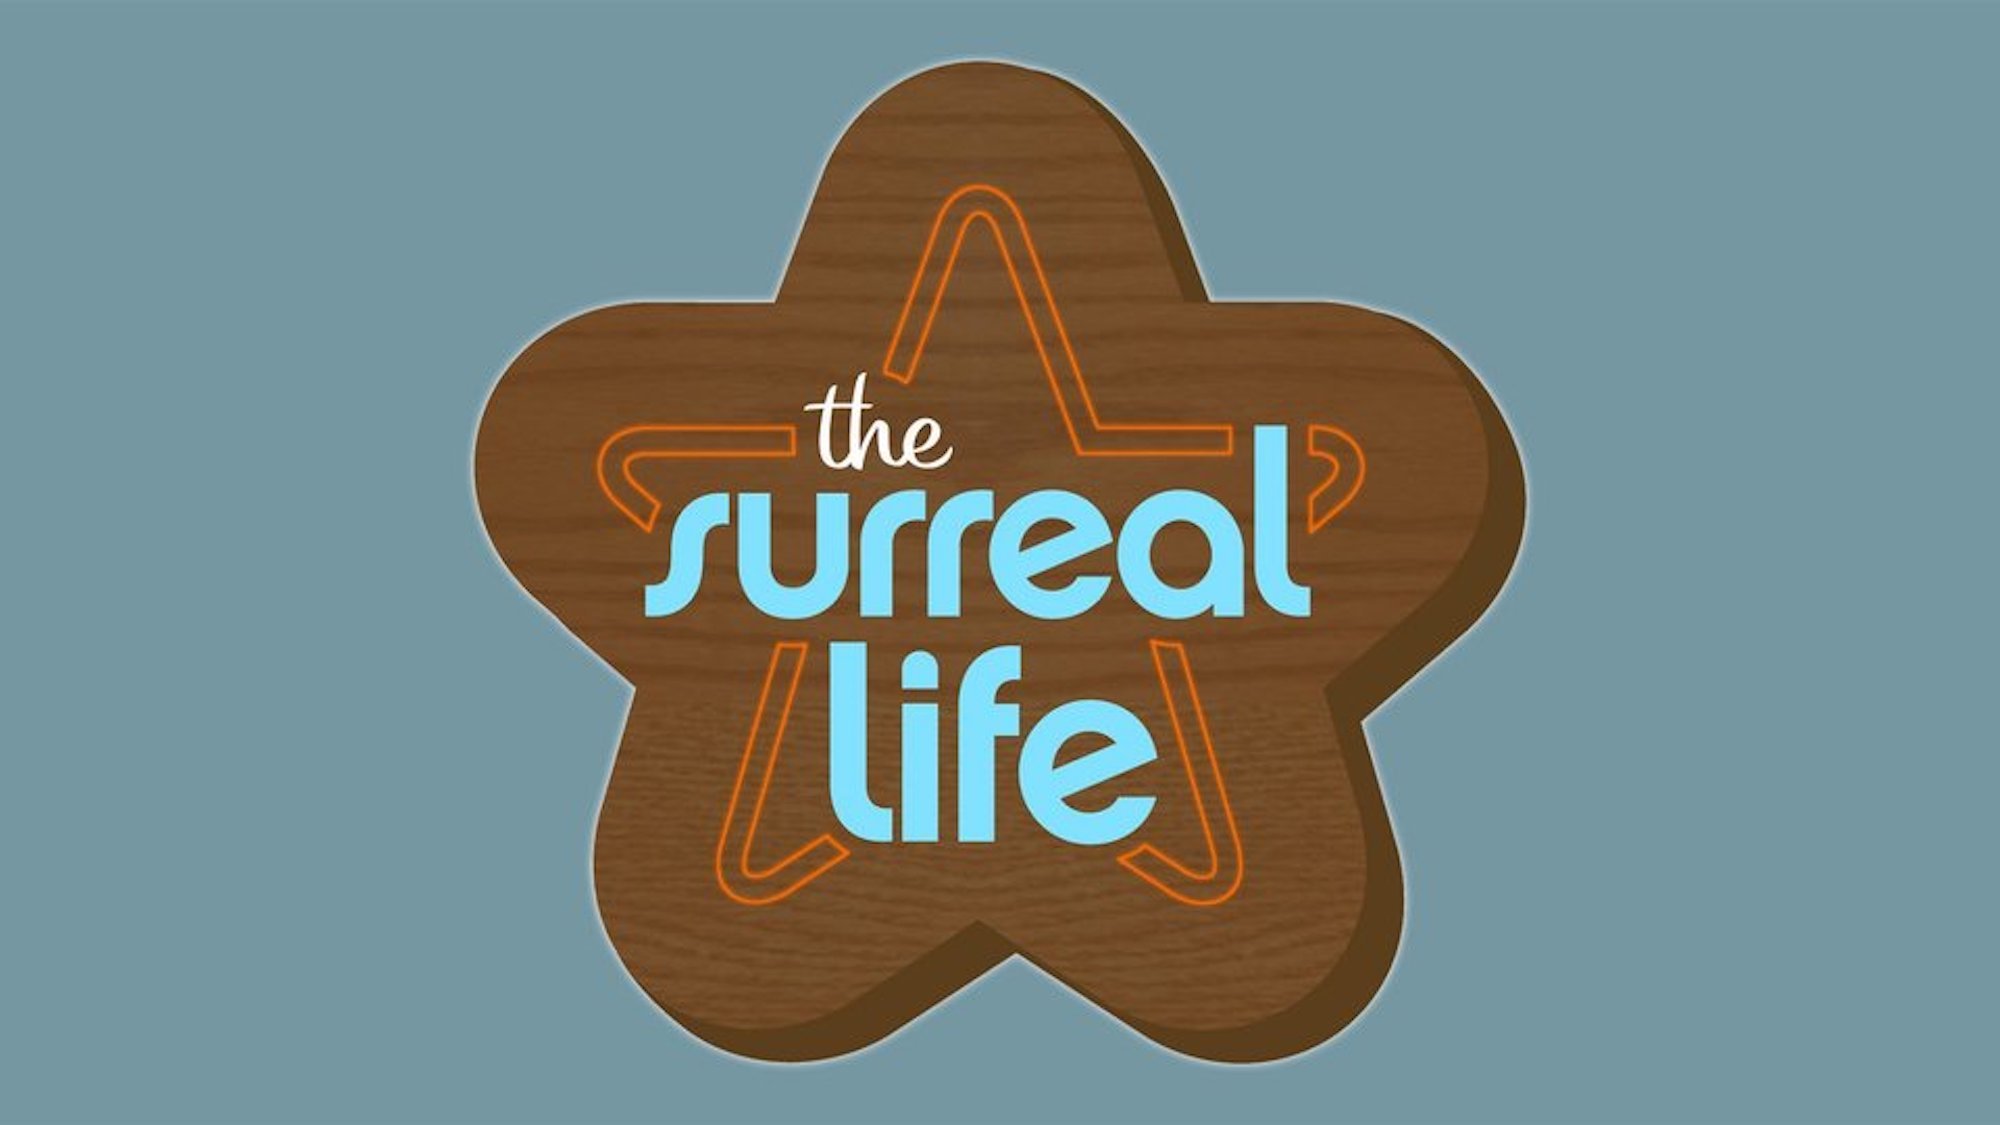 'The Surreal Life' logo from VH1